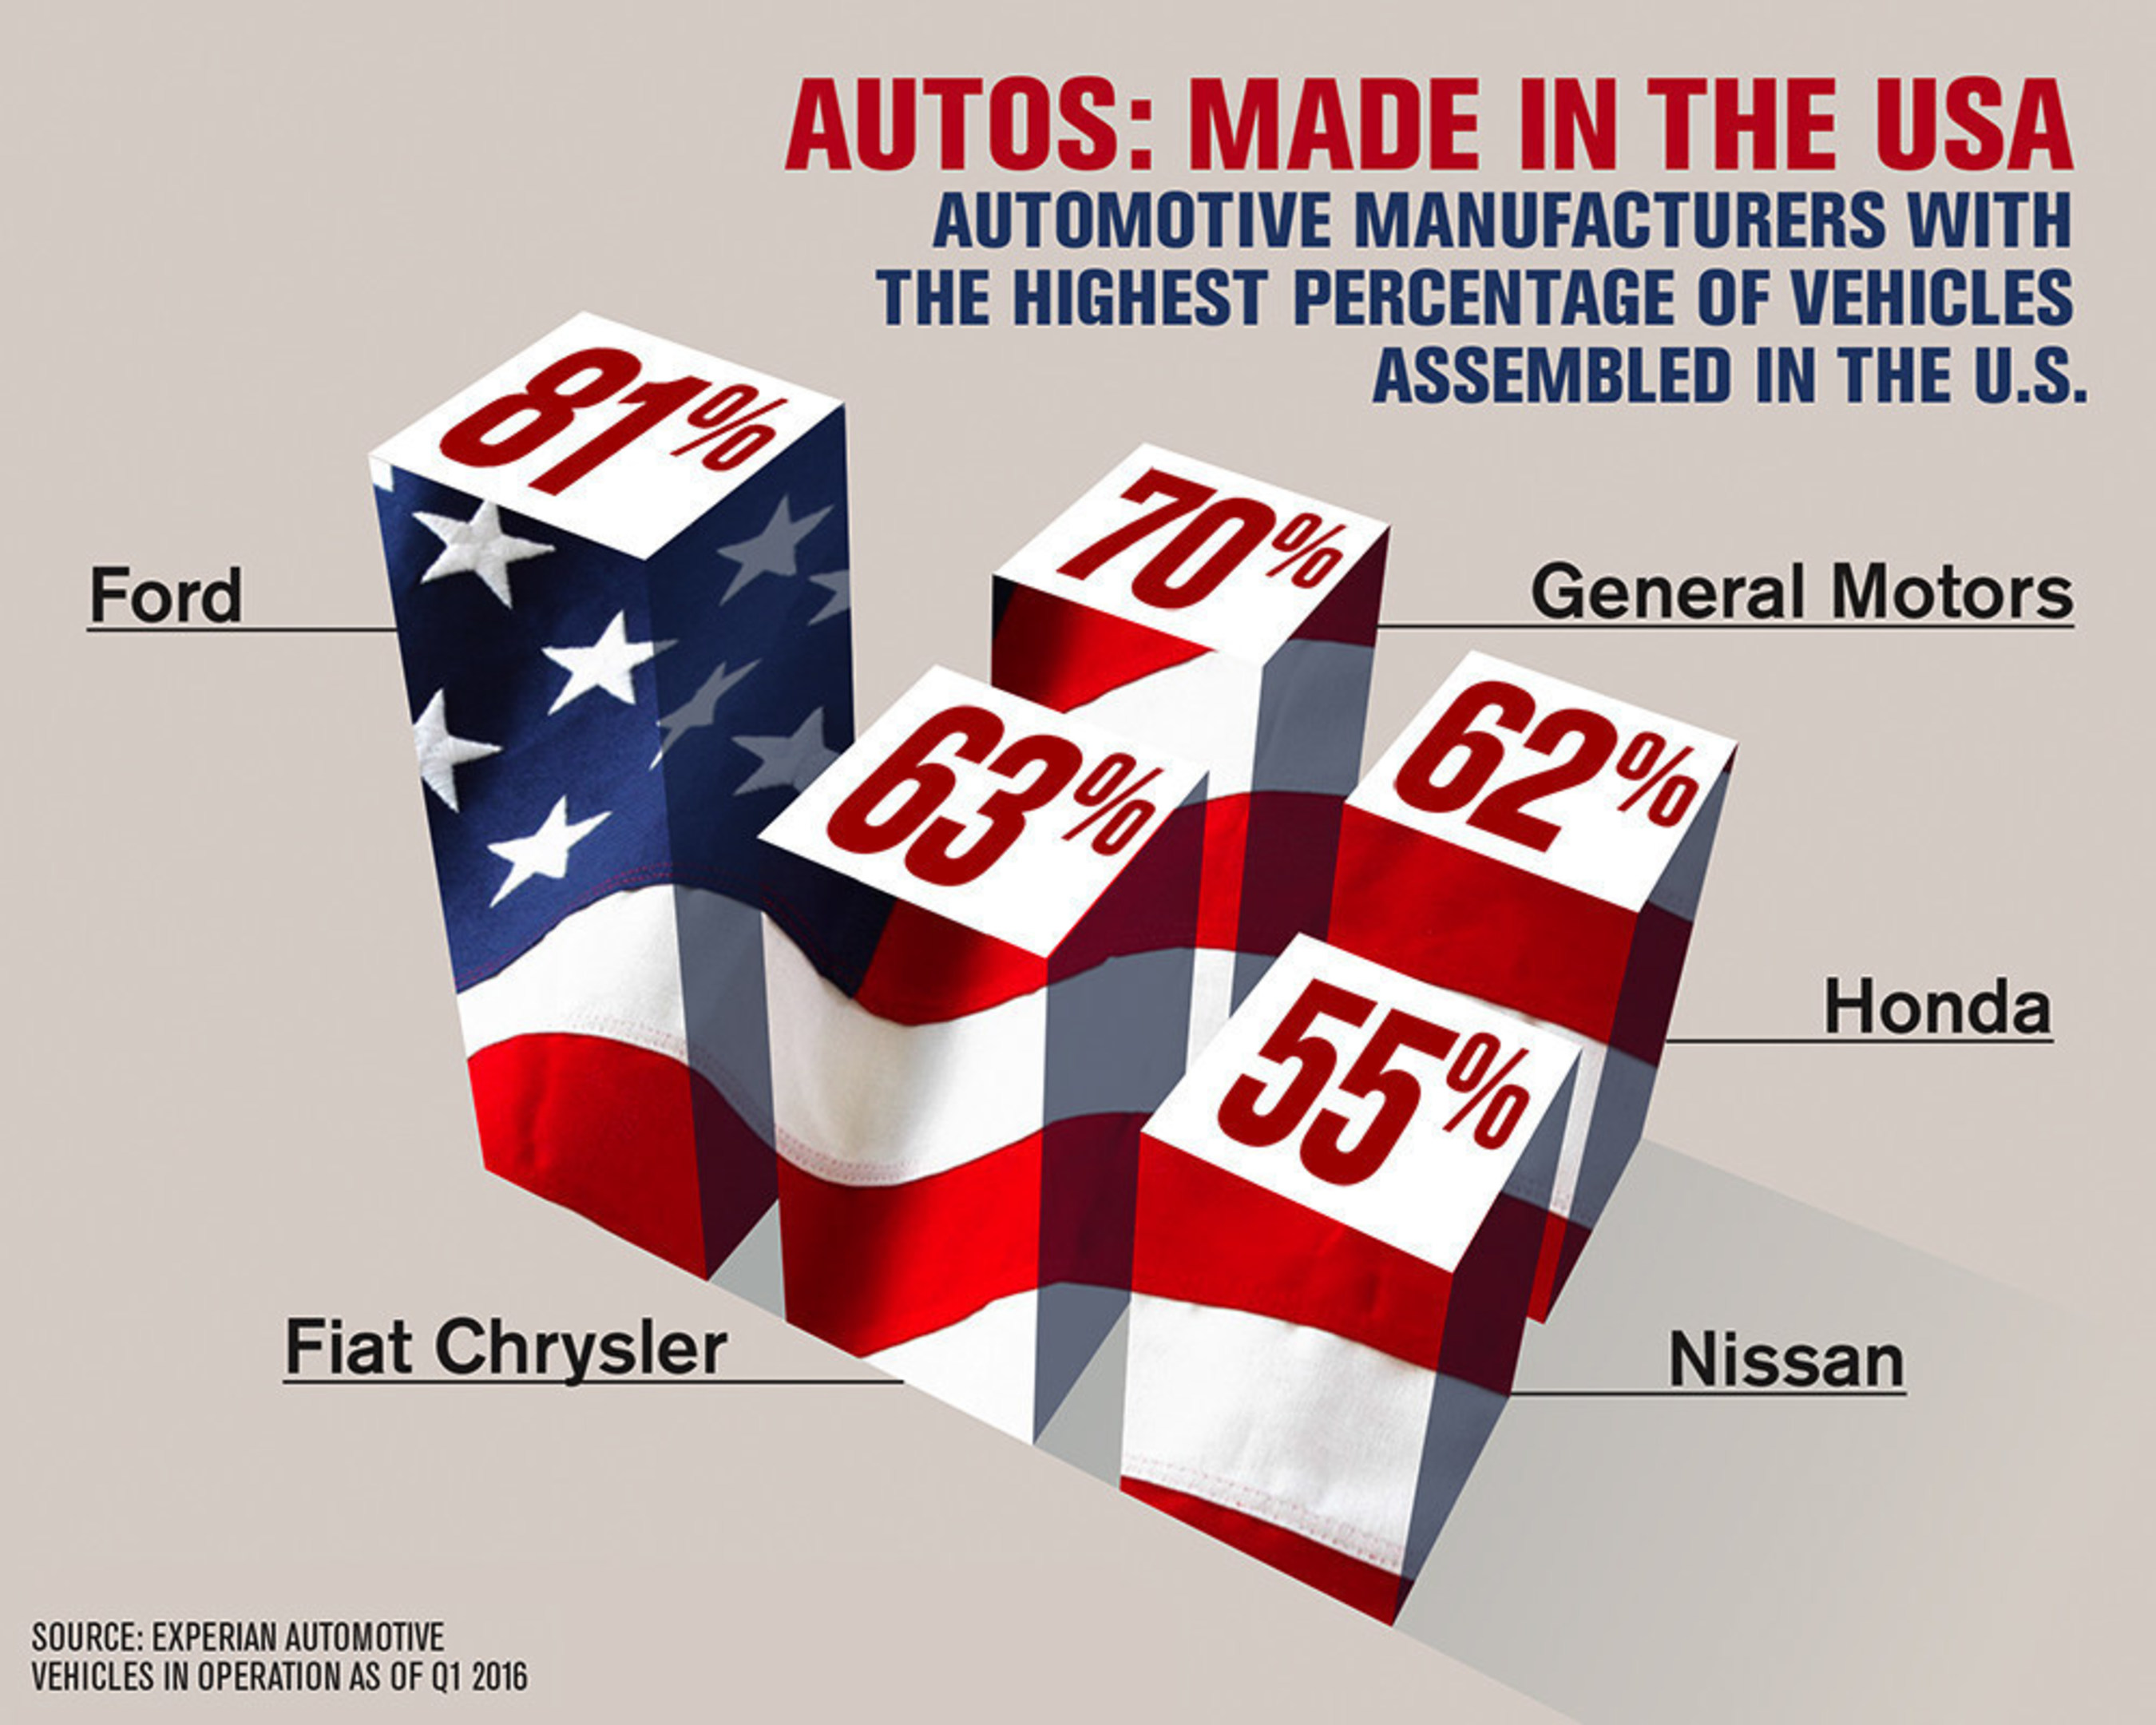 Autos: Made in the USA